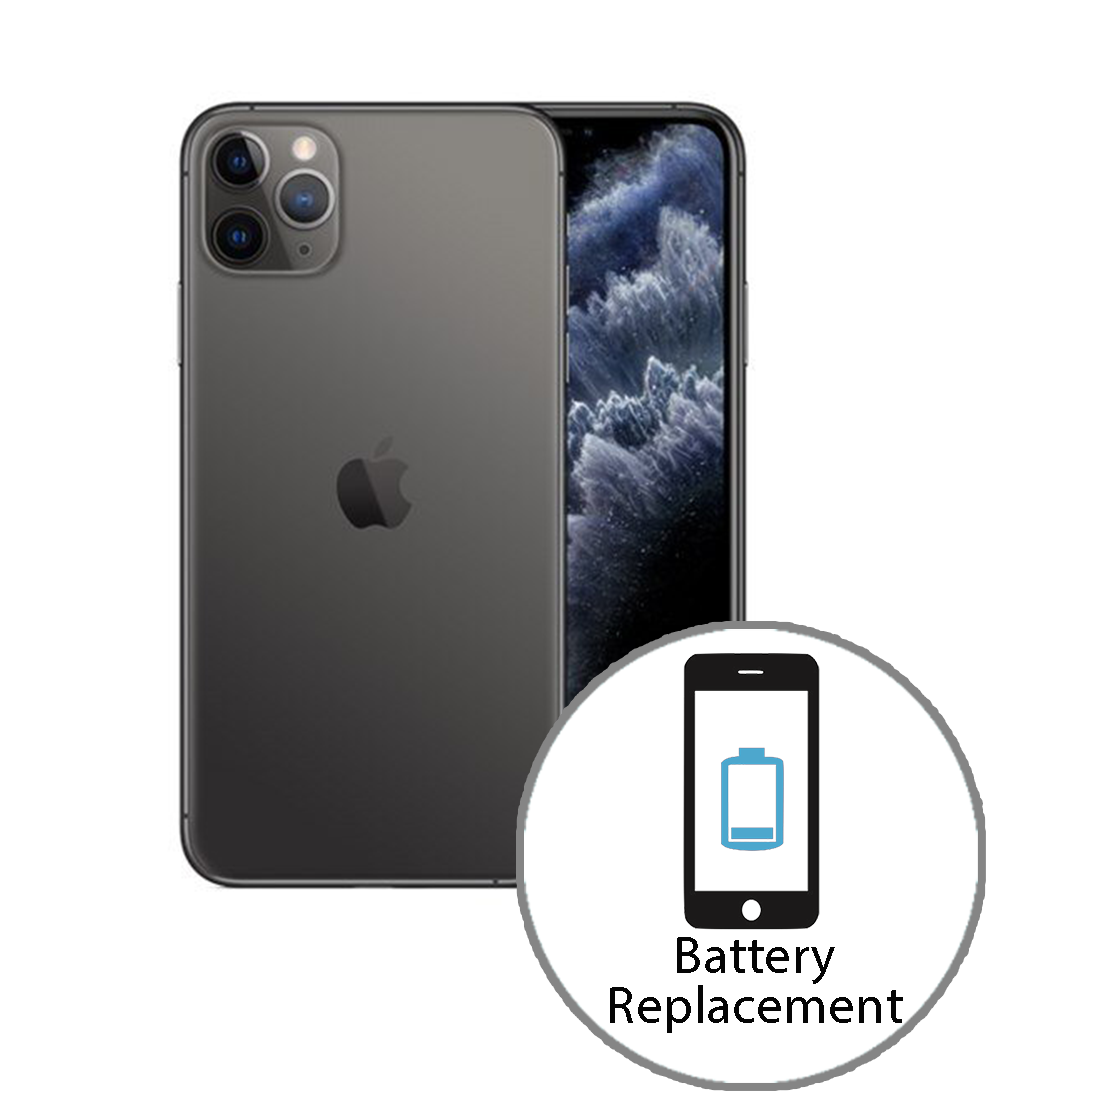 iPhone 11 Pro Max review: salvaged by epic battery life, iPhone